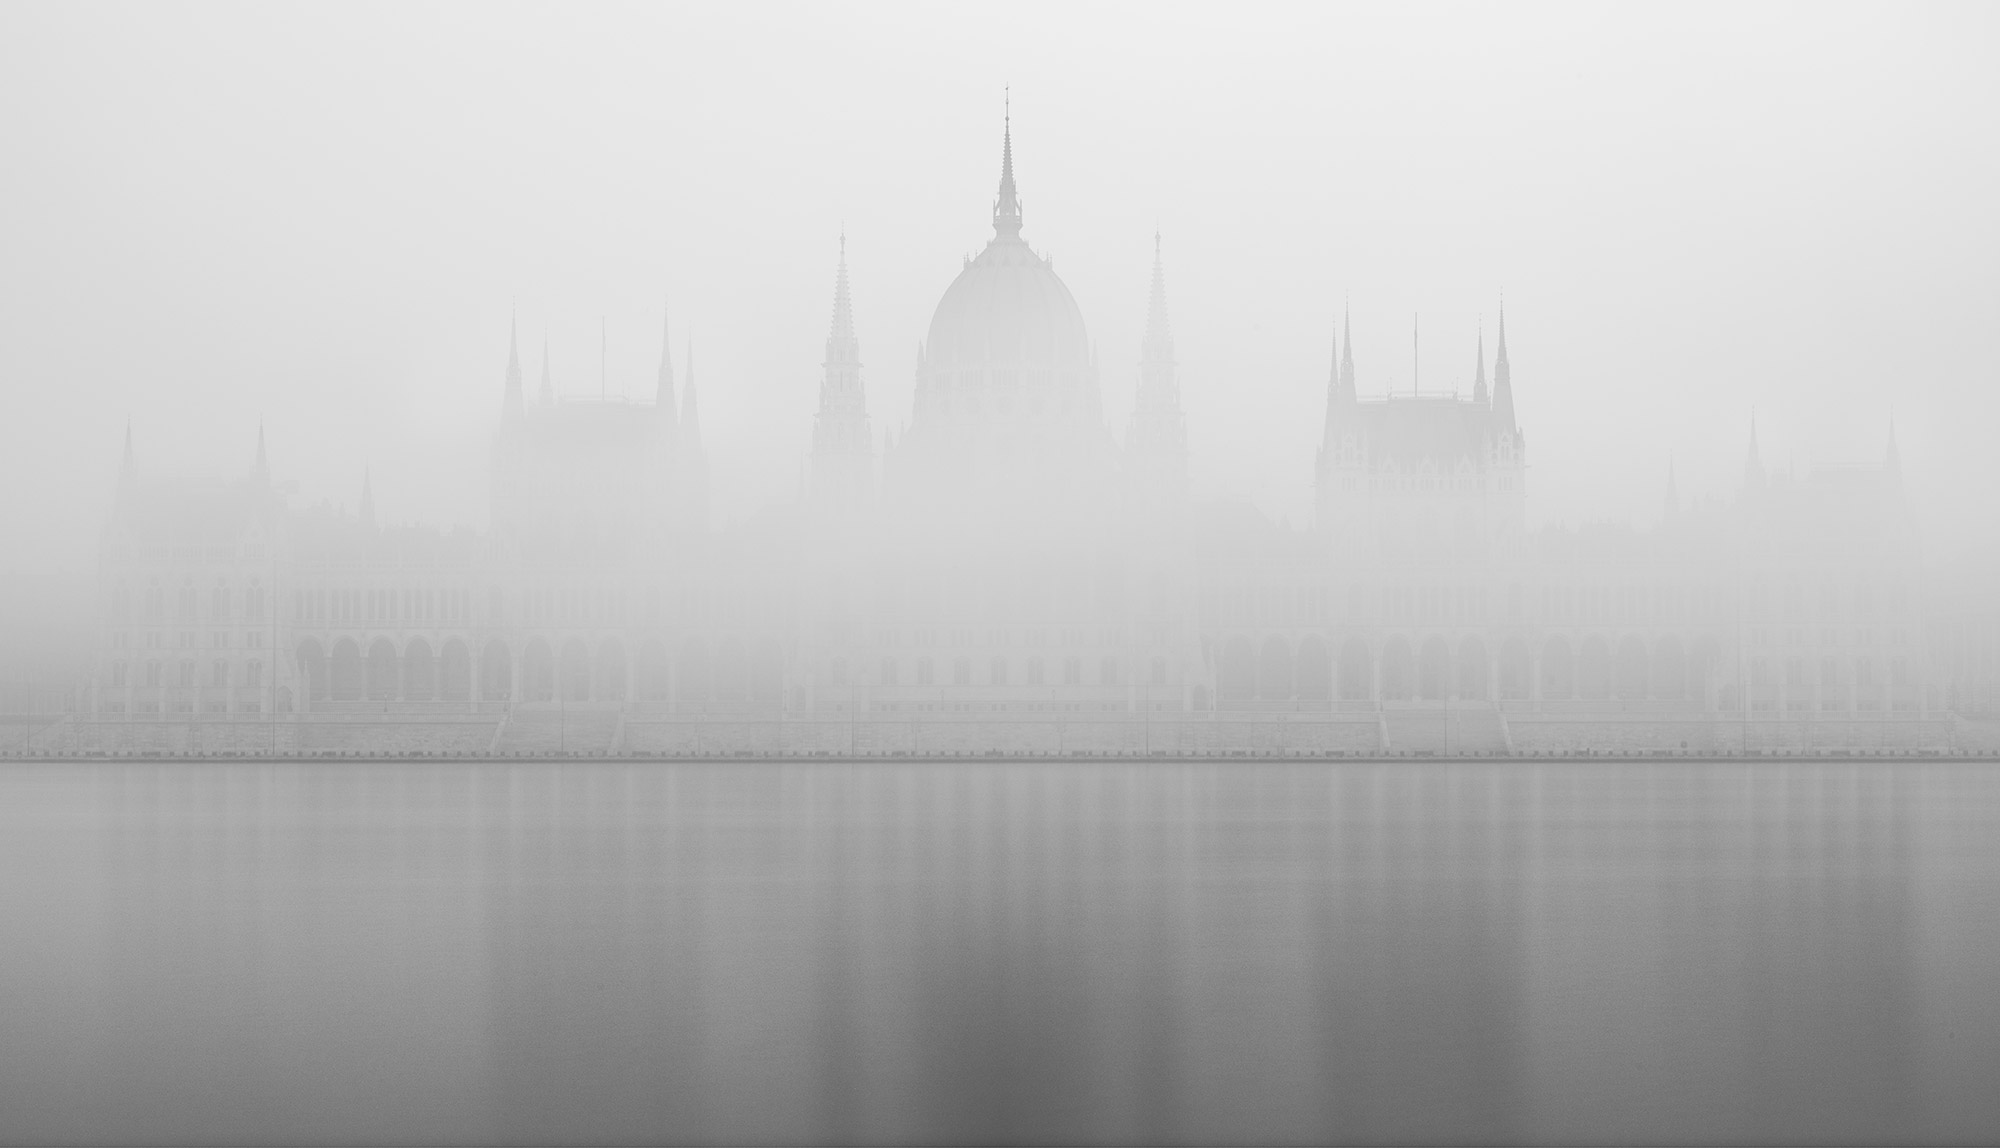 Experience the ethereal beauty of Budapest's Parliament enveloped in dense fog in this captivating long exposure photograph by travel photographer Jennifer Esseiva, captured with her Nikon Z8. The iconic silhouette of the Parliament building emerges mysteriously from the mist, creating a hauntingly beautiful scene. With expert composition and skilled use of long exposure techniques, Jennifer Esseiva brings to life the enchanting ambiance of Budapest's skyline shrouded in fog. Immerse yourself in the atmospheric allure of this unique perspective on the Parliament, captured with precision and artistry.